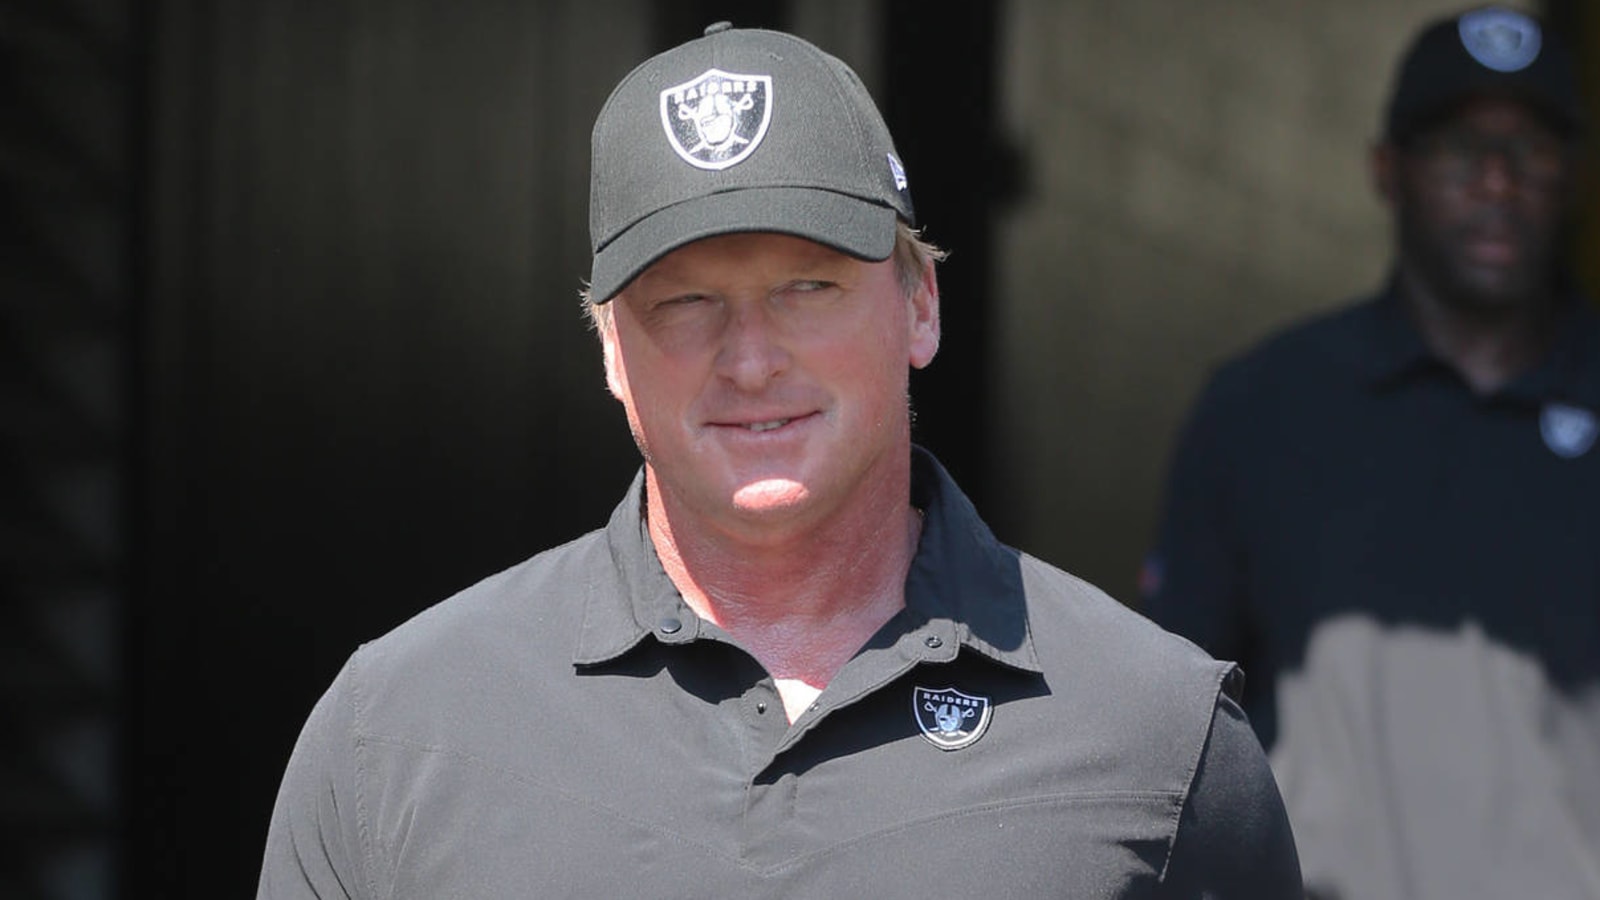 Former Raiders coach Jon Gruden: 'The truth will come out'